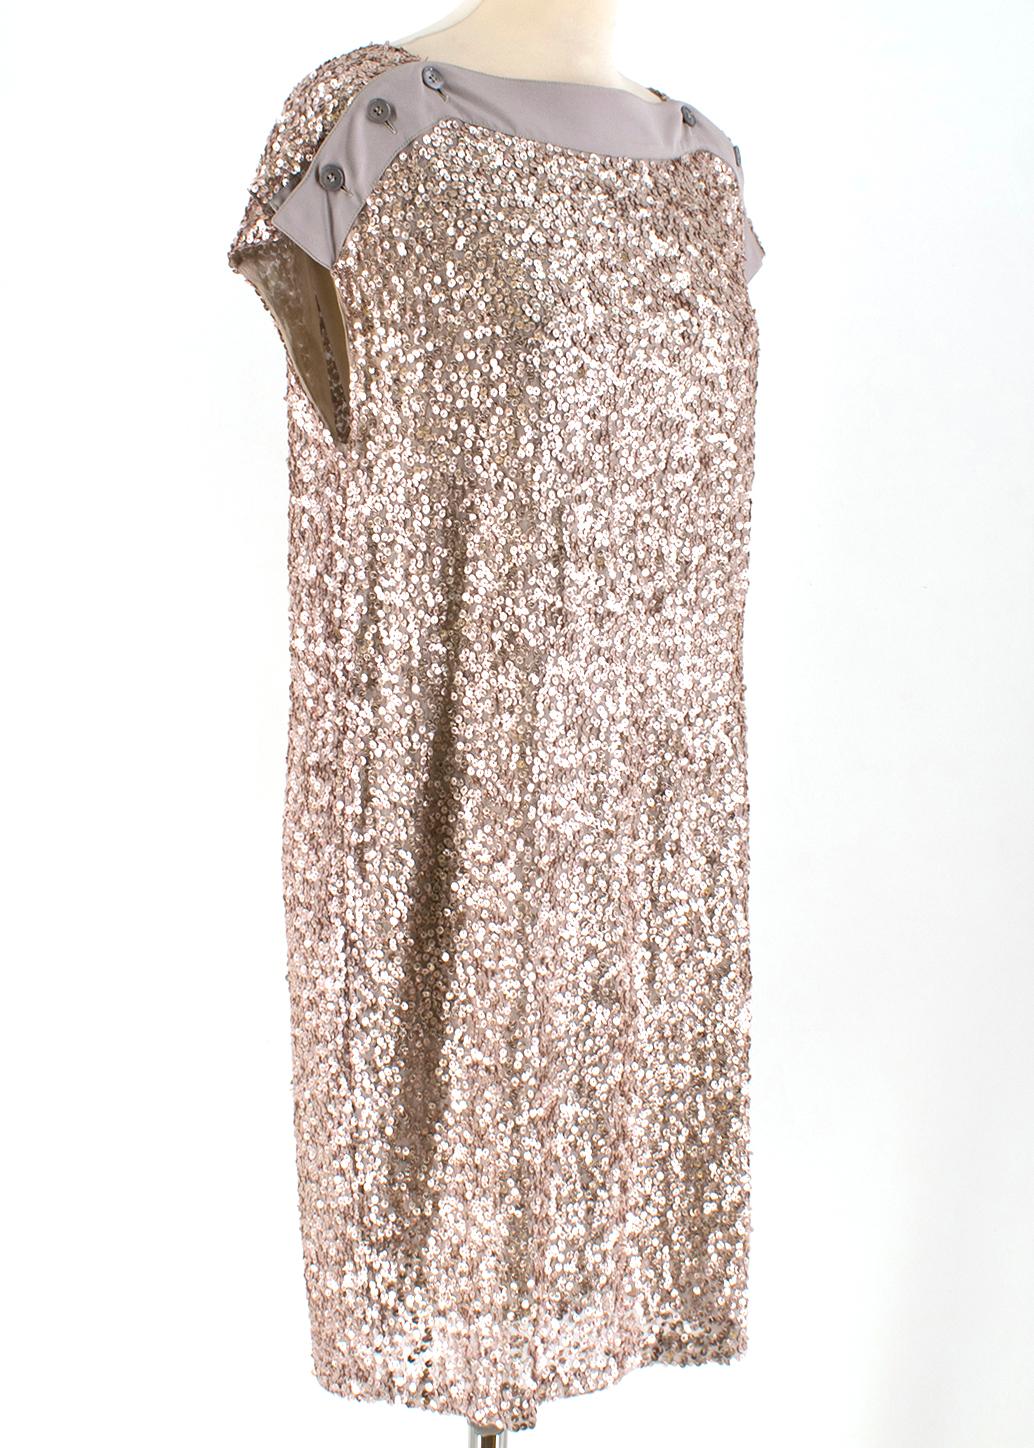 Stella McCartney Taupe Sequin Shift Dress

-Silk and sequin body
-gold/taupe tones
-Short-sleeved 
-Functional buttons on sleeves
-Silk lining

Please note, these items are pre-owned and may show some signs of storage, even when unworn and unused.